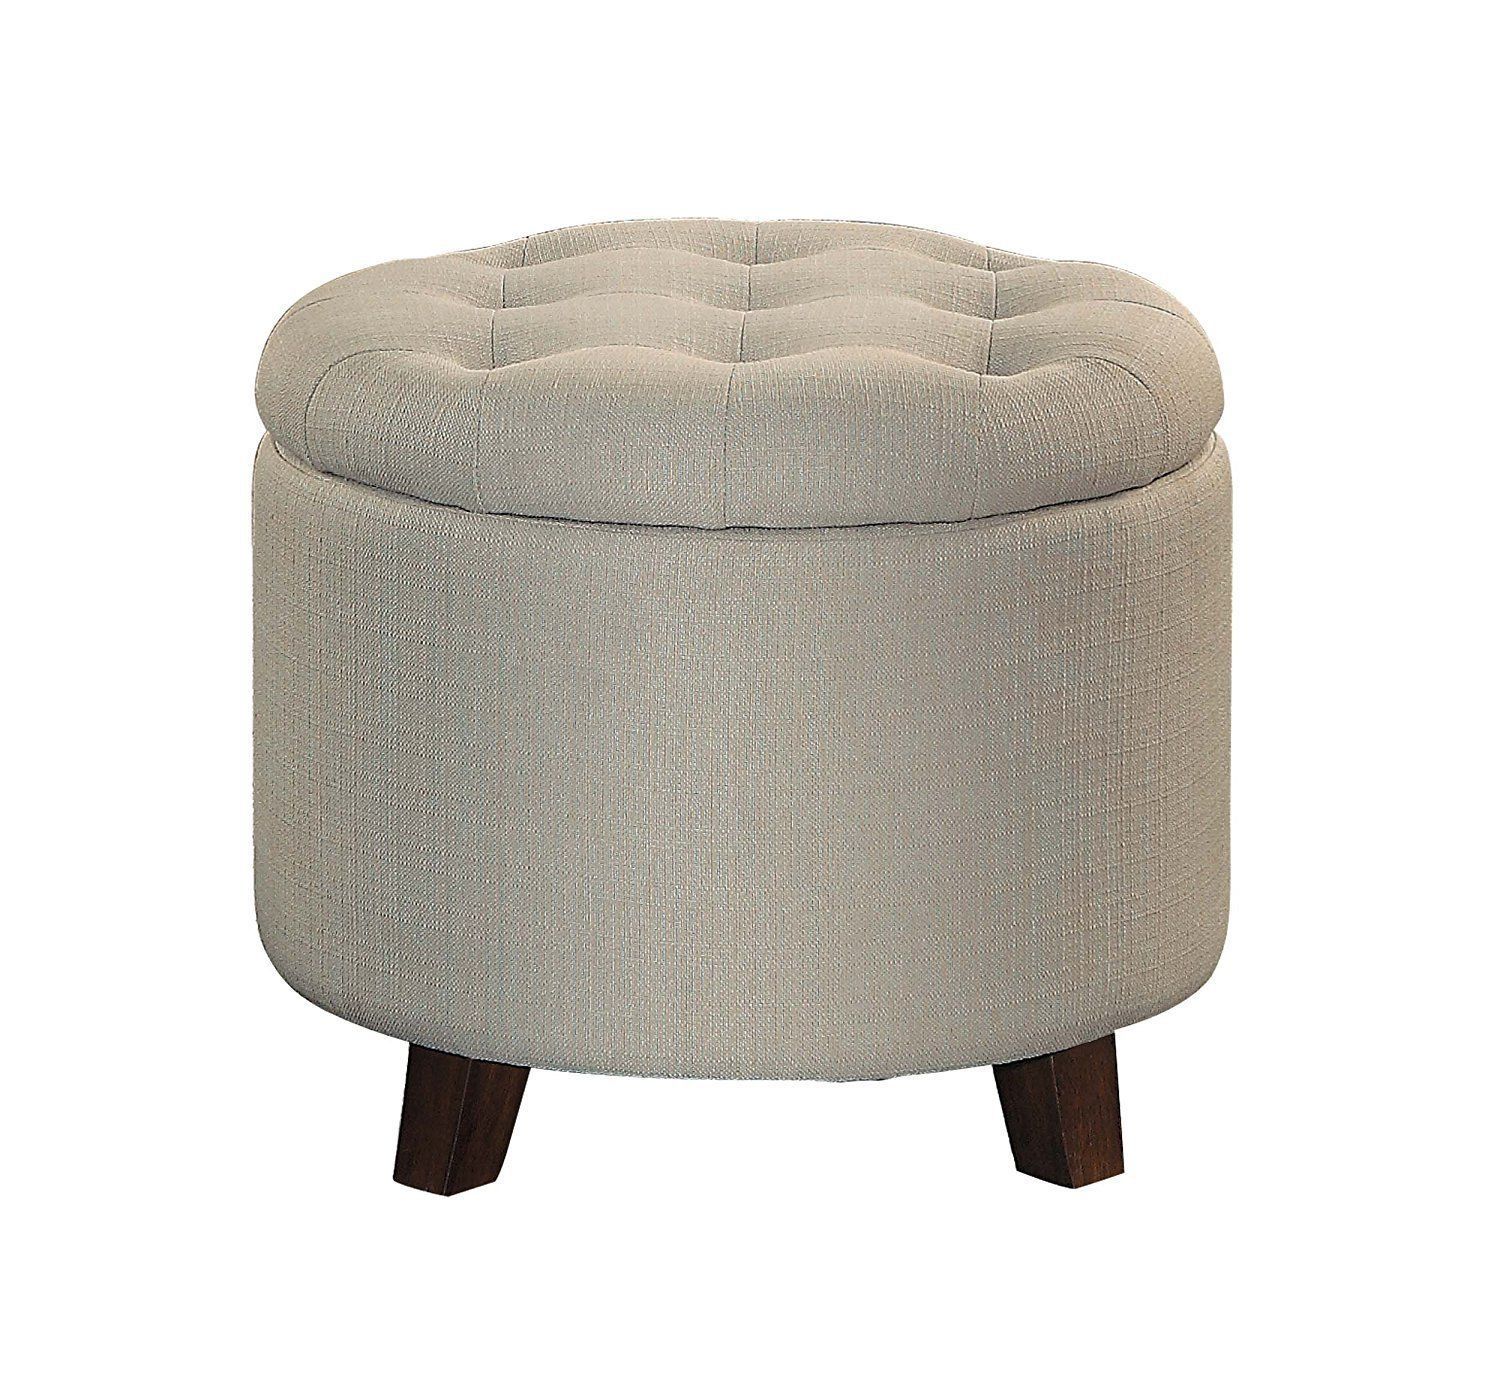 Button Tufted Wooden Round Storage Ottoman Upholstered In Fabric, Beige Pertaining To Brown Fabric Tufted Surfboard Ottomans (View 19 of 20)